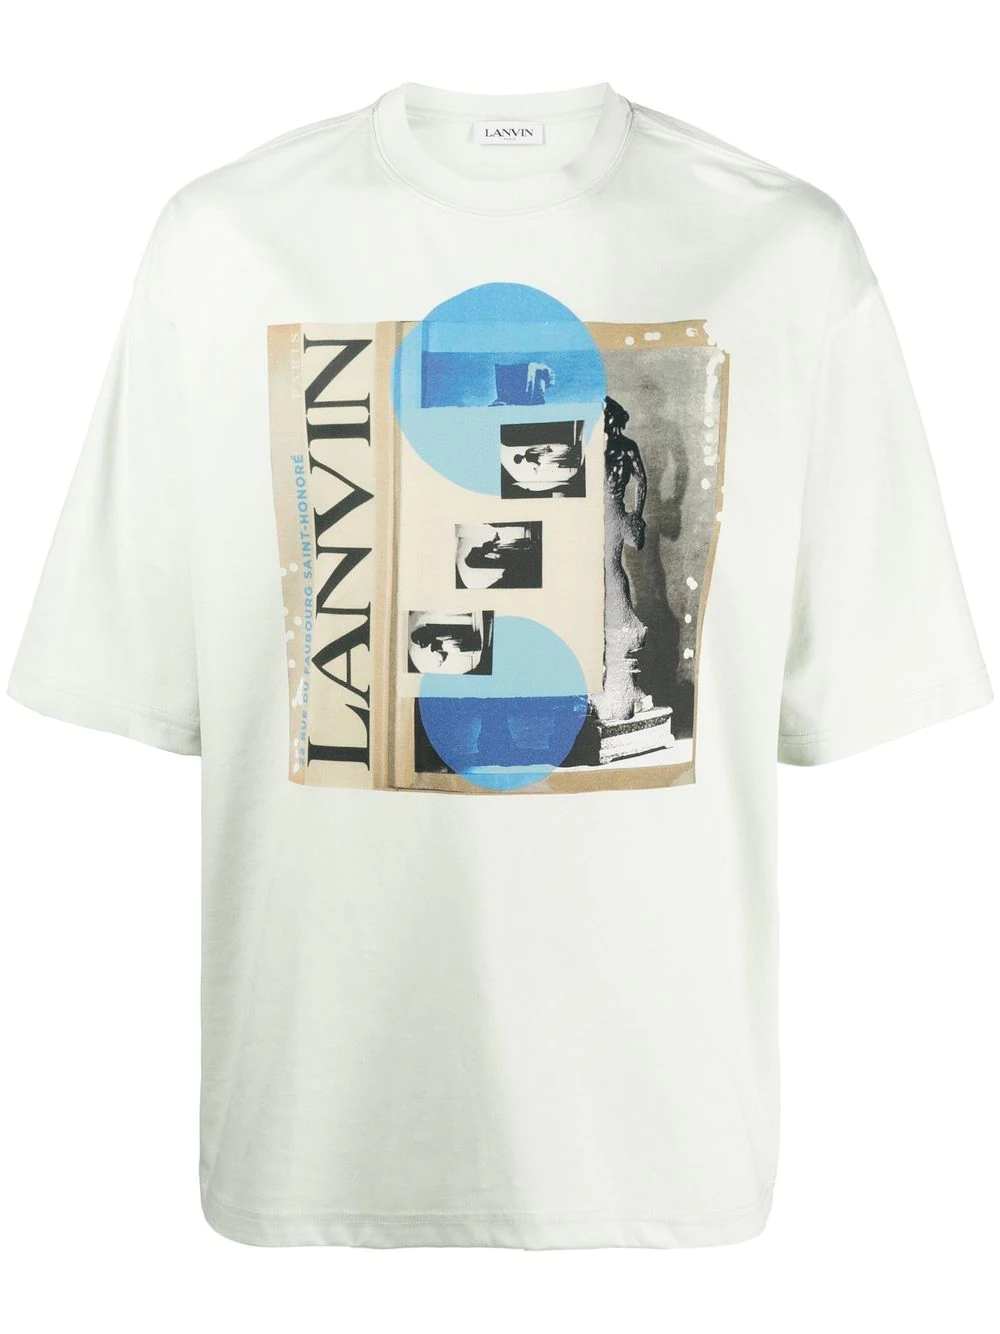 LANVIN SHORT-SLEEVED T-SHIRT WITH GRAPHIC PRINT